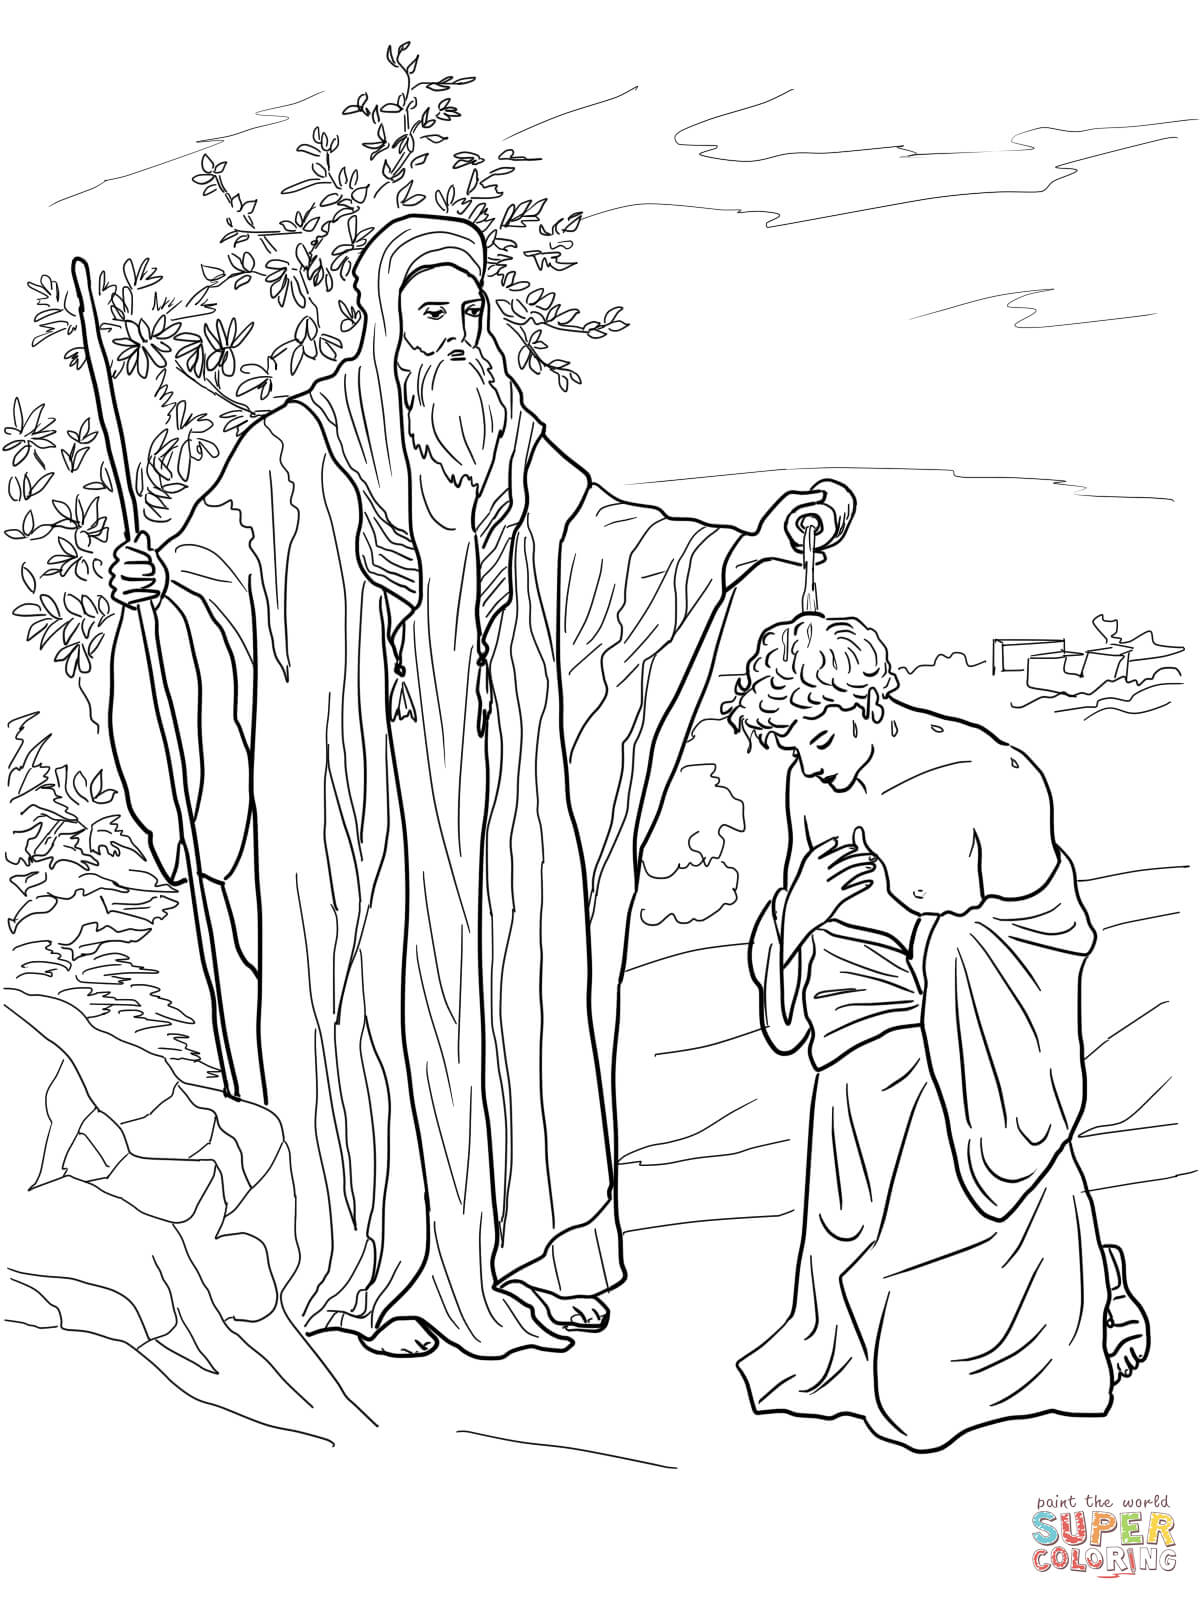 Hannah Prays for a Son coloring page | Free Printable Coloring Pages